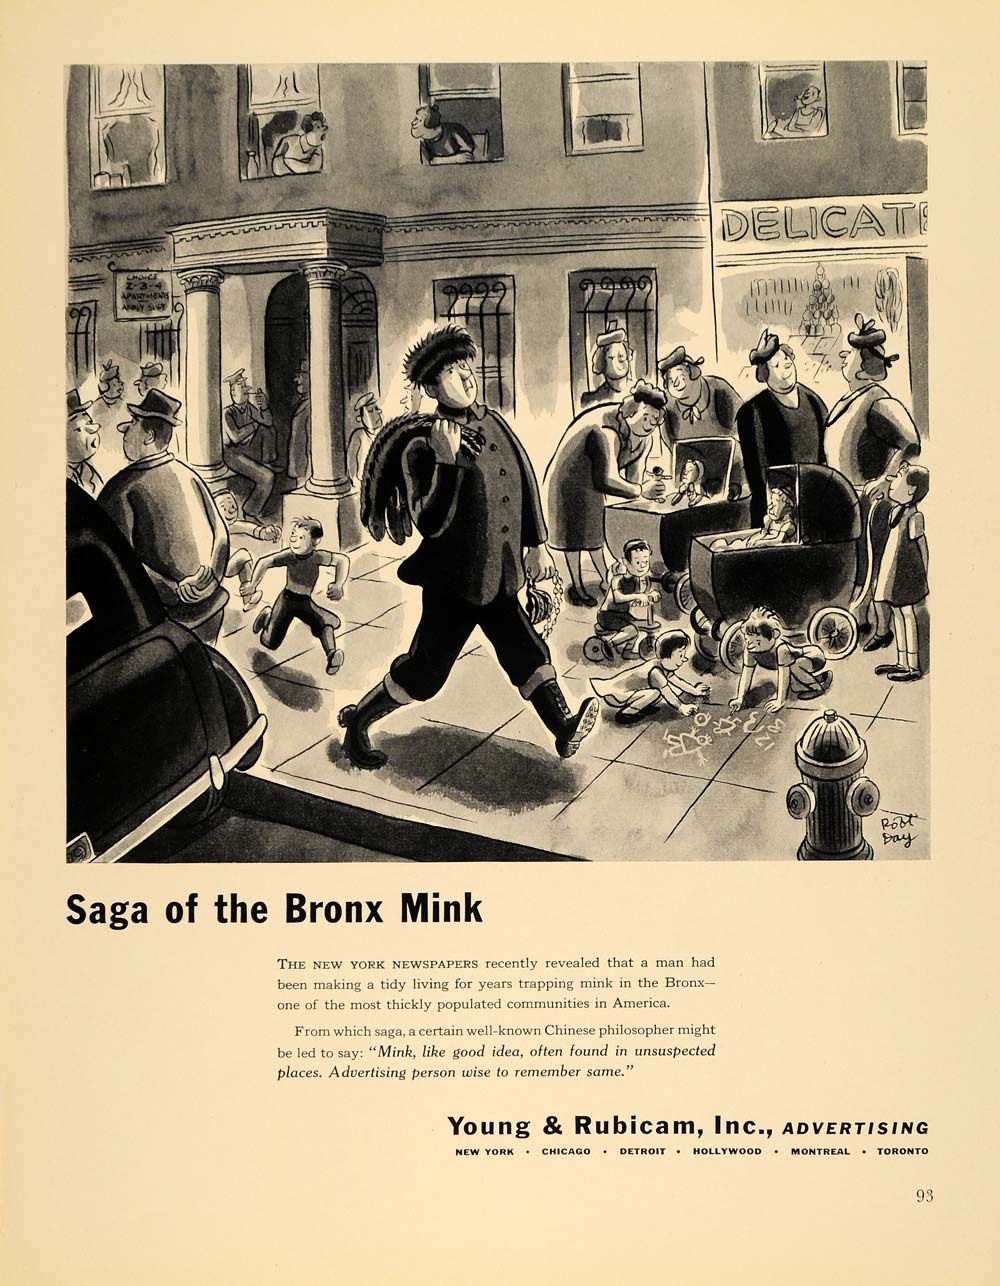 1940 Ad Young & Rubicam Adverstising Bronx Robt Day - ORIGINAL ADVERTISING F4A